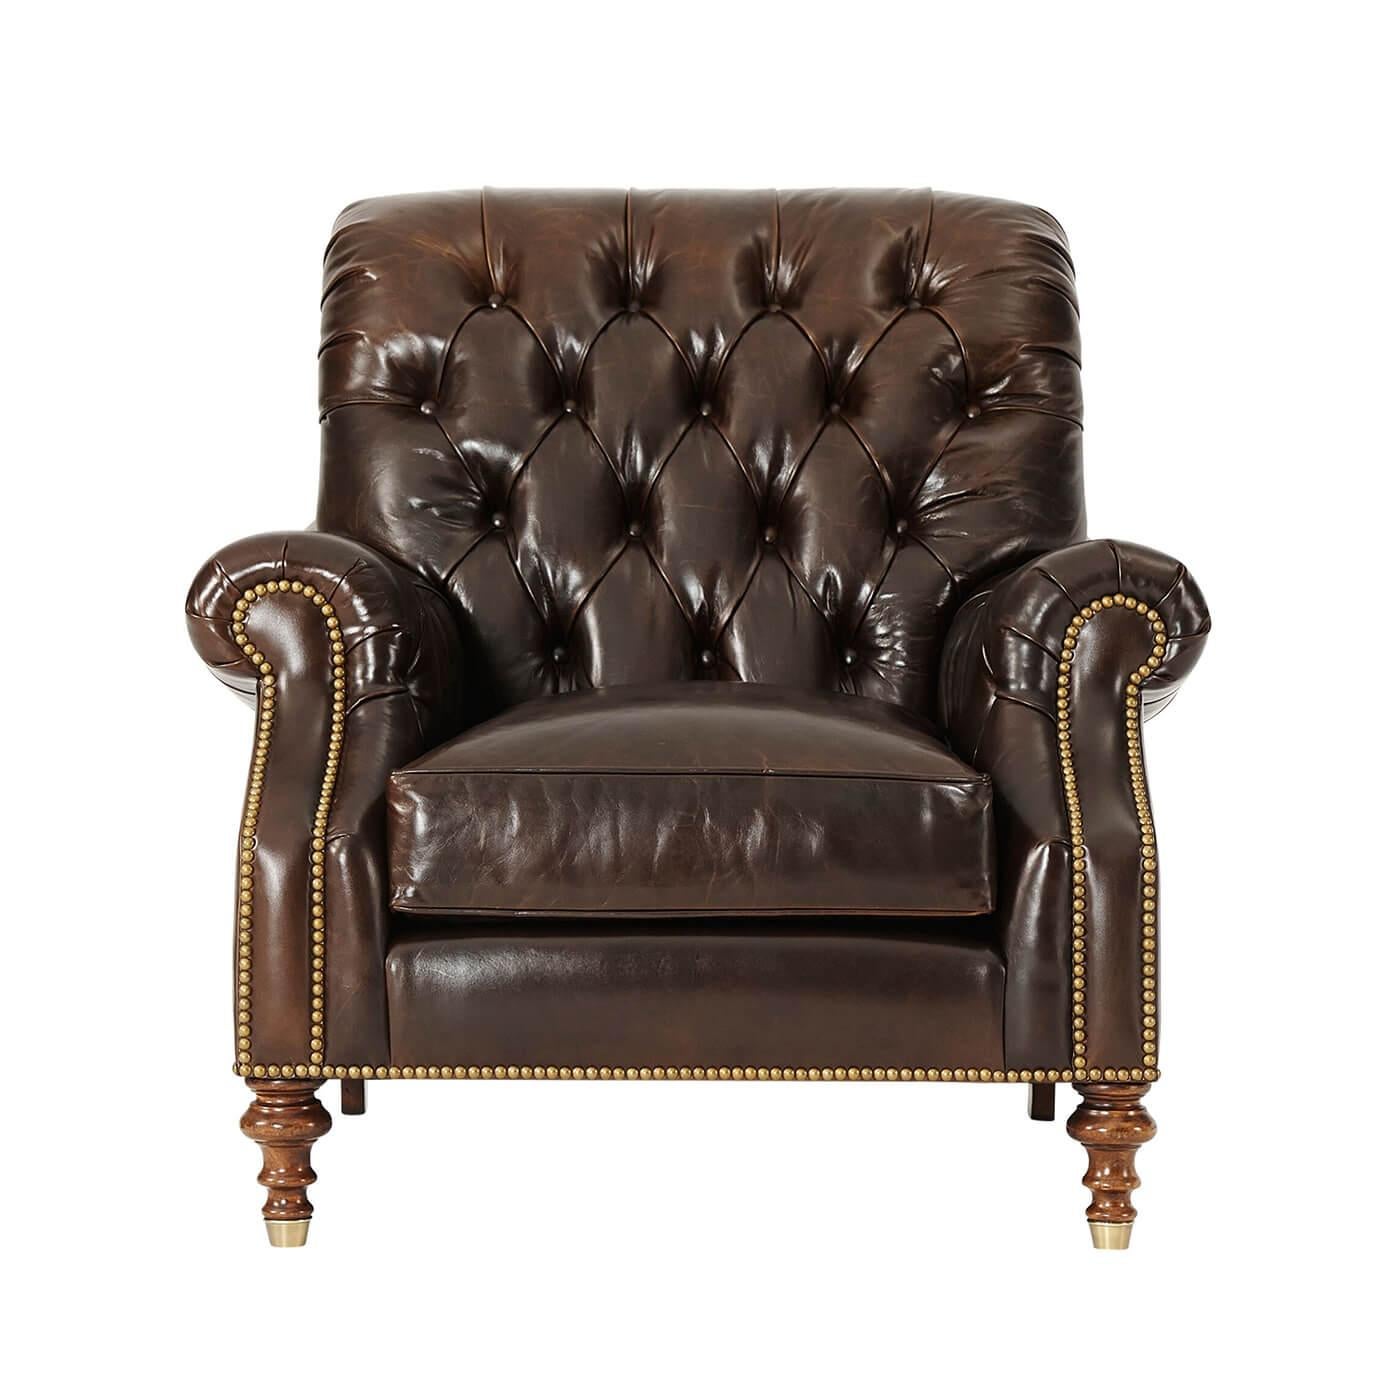 A British style leather-upholstered armchair, the tufted scroll over back above a cushioned seat, enclosed by tufted roll arms, on turned legs with brass cappings. Inspired by a Victorian original.

Dimensions: 38